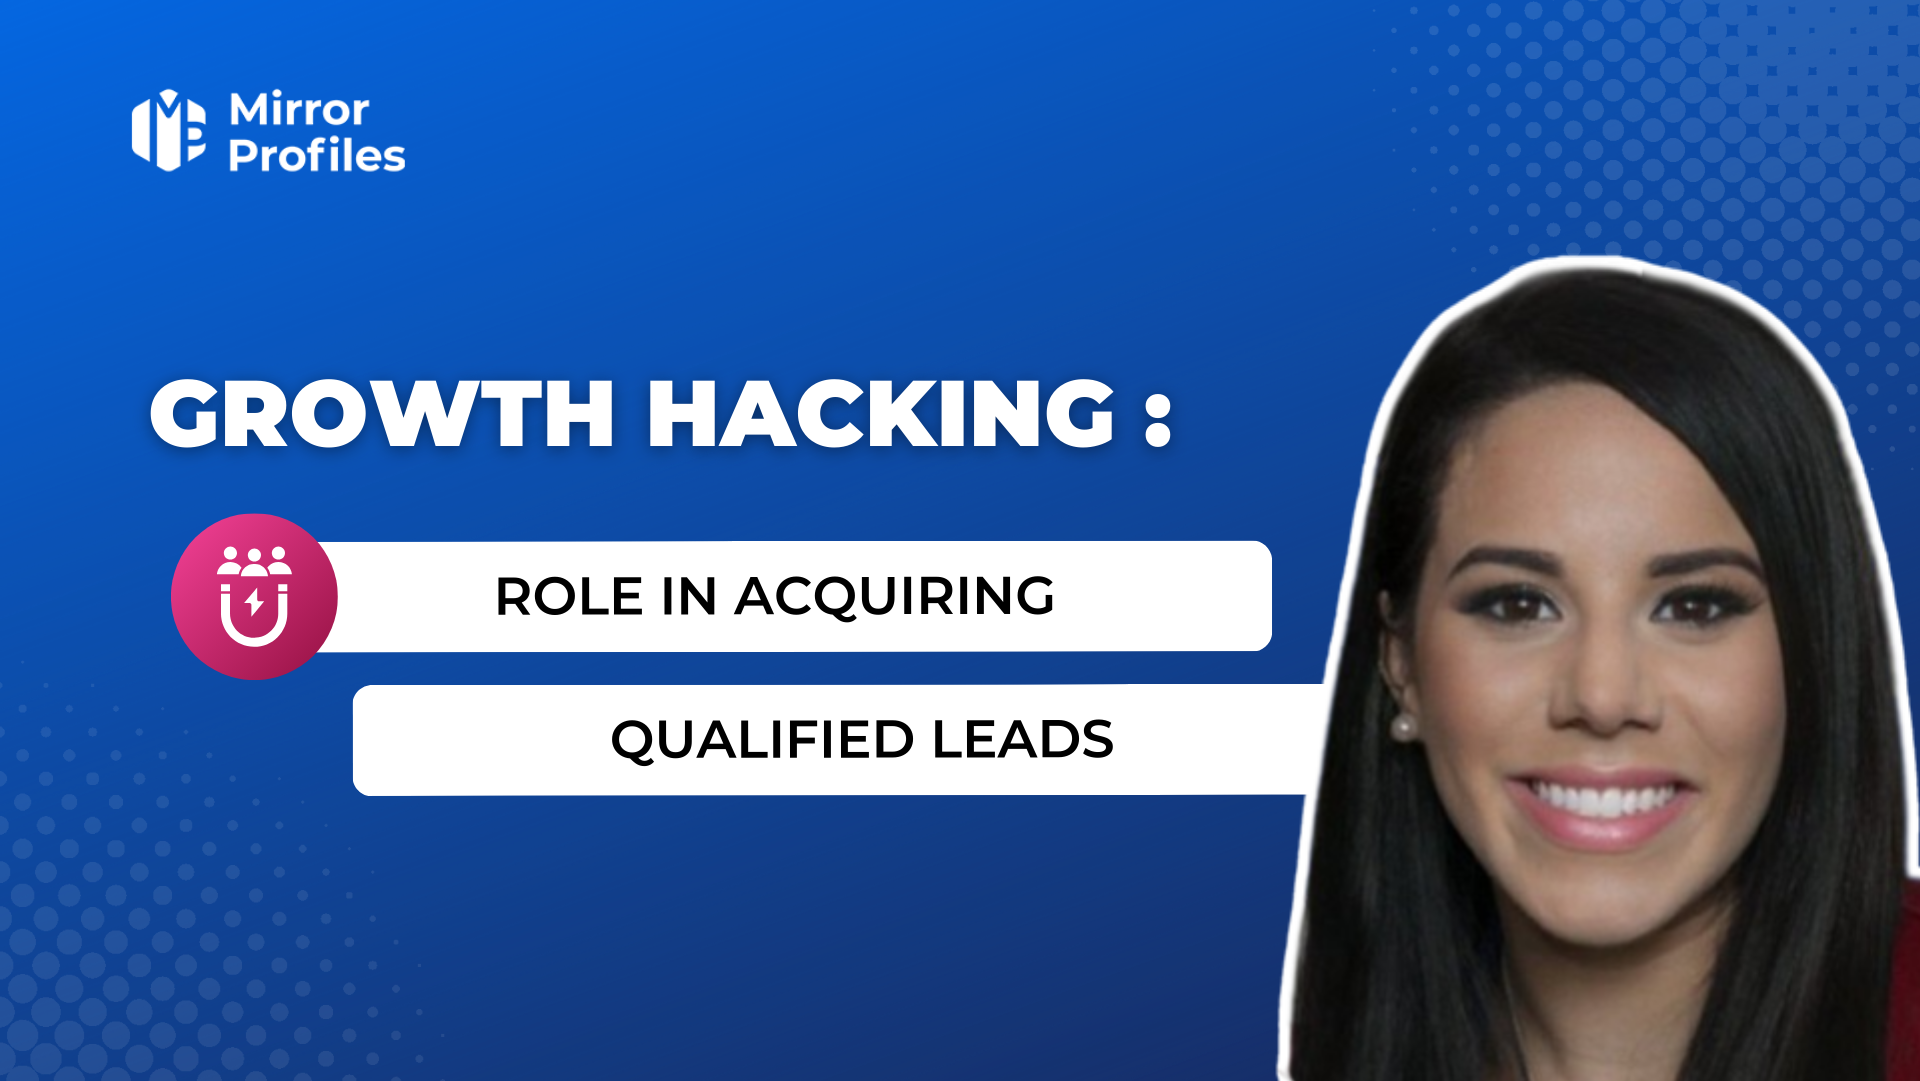 The role of Growth Hacking in acquiring qualified leads